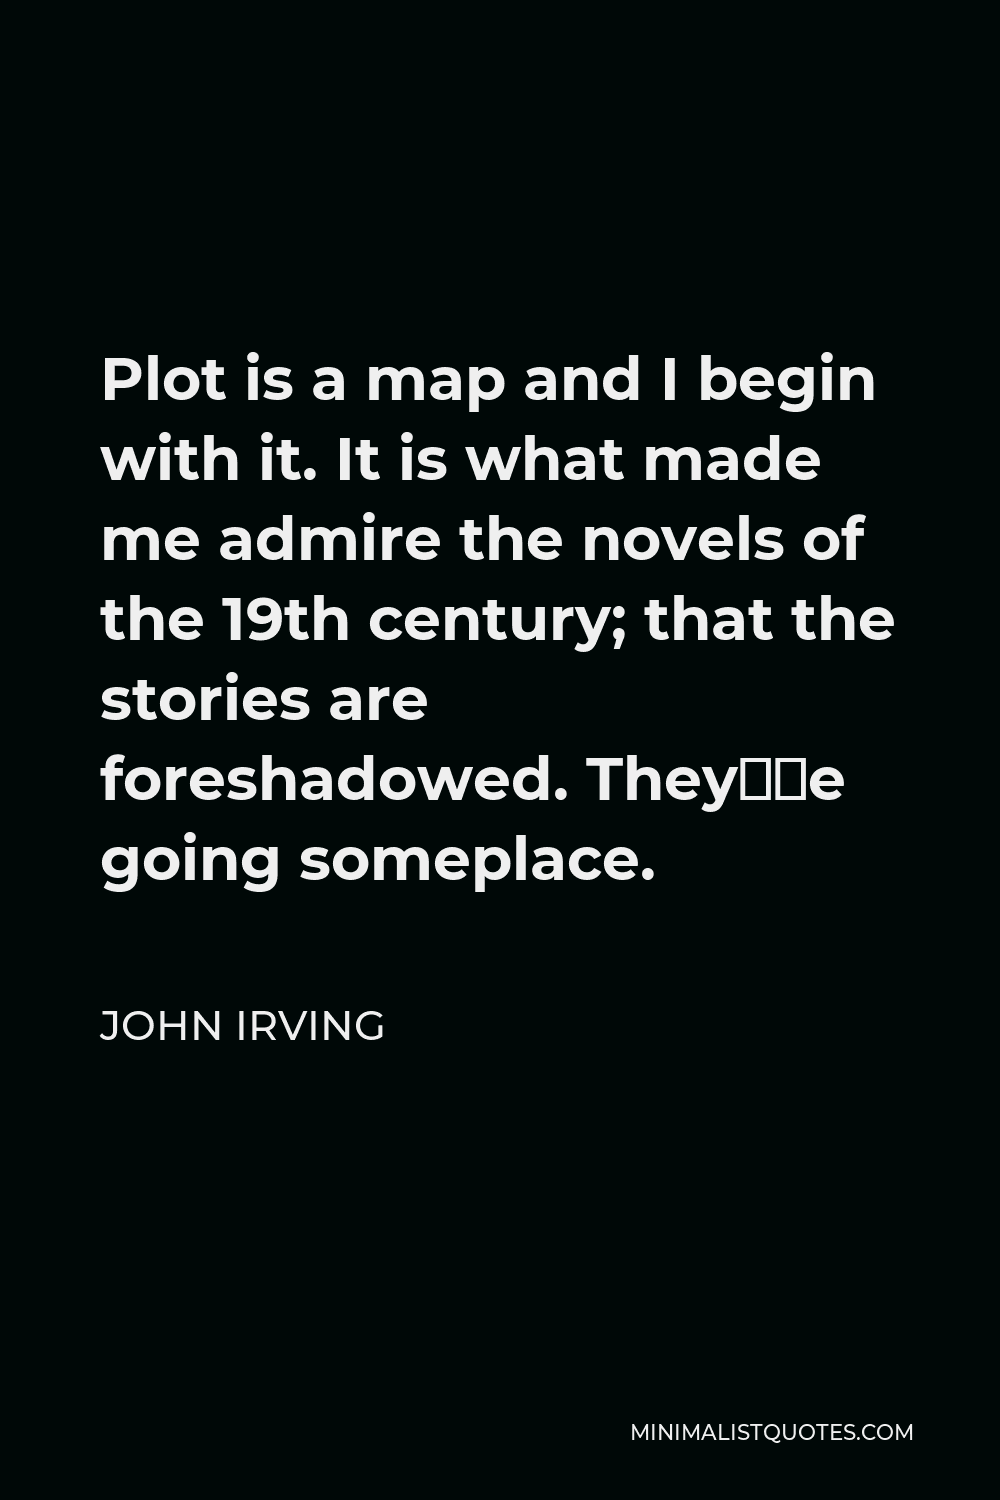 John Irving Quote - Plot is a map and I begin with it. It is what made me admire the novels of the 19th century; that the stories are foreshadowed. TheyÕre going someplace.